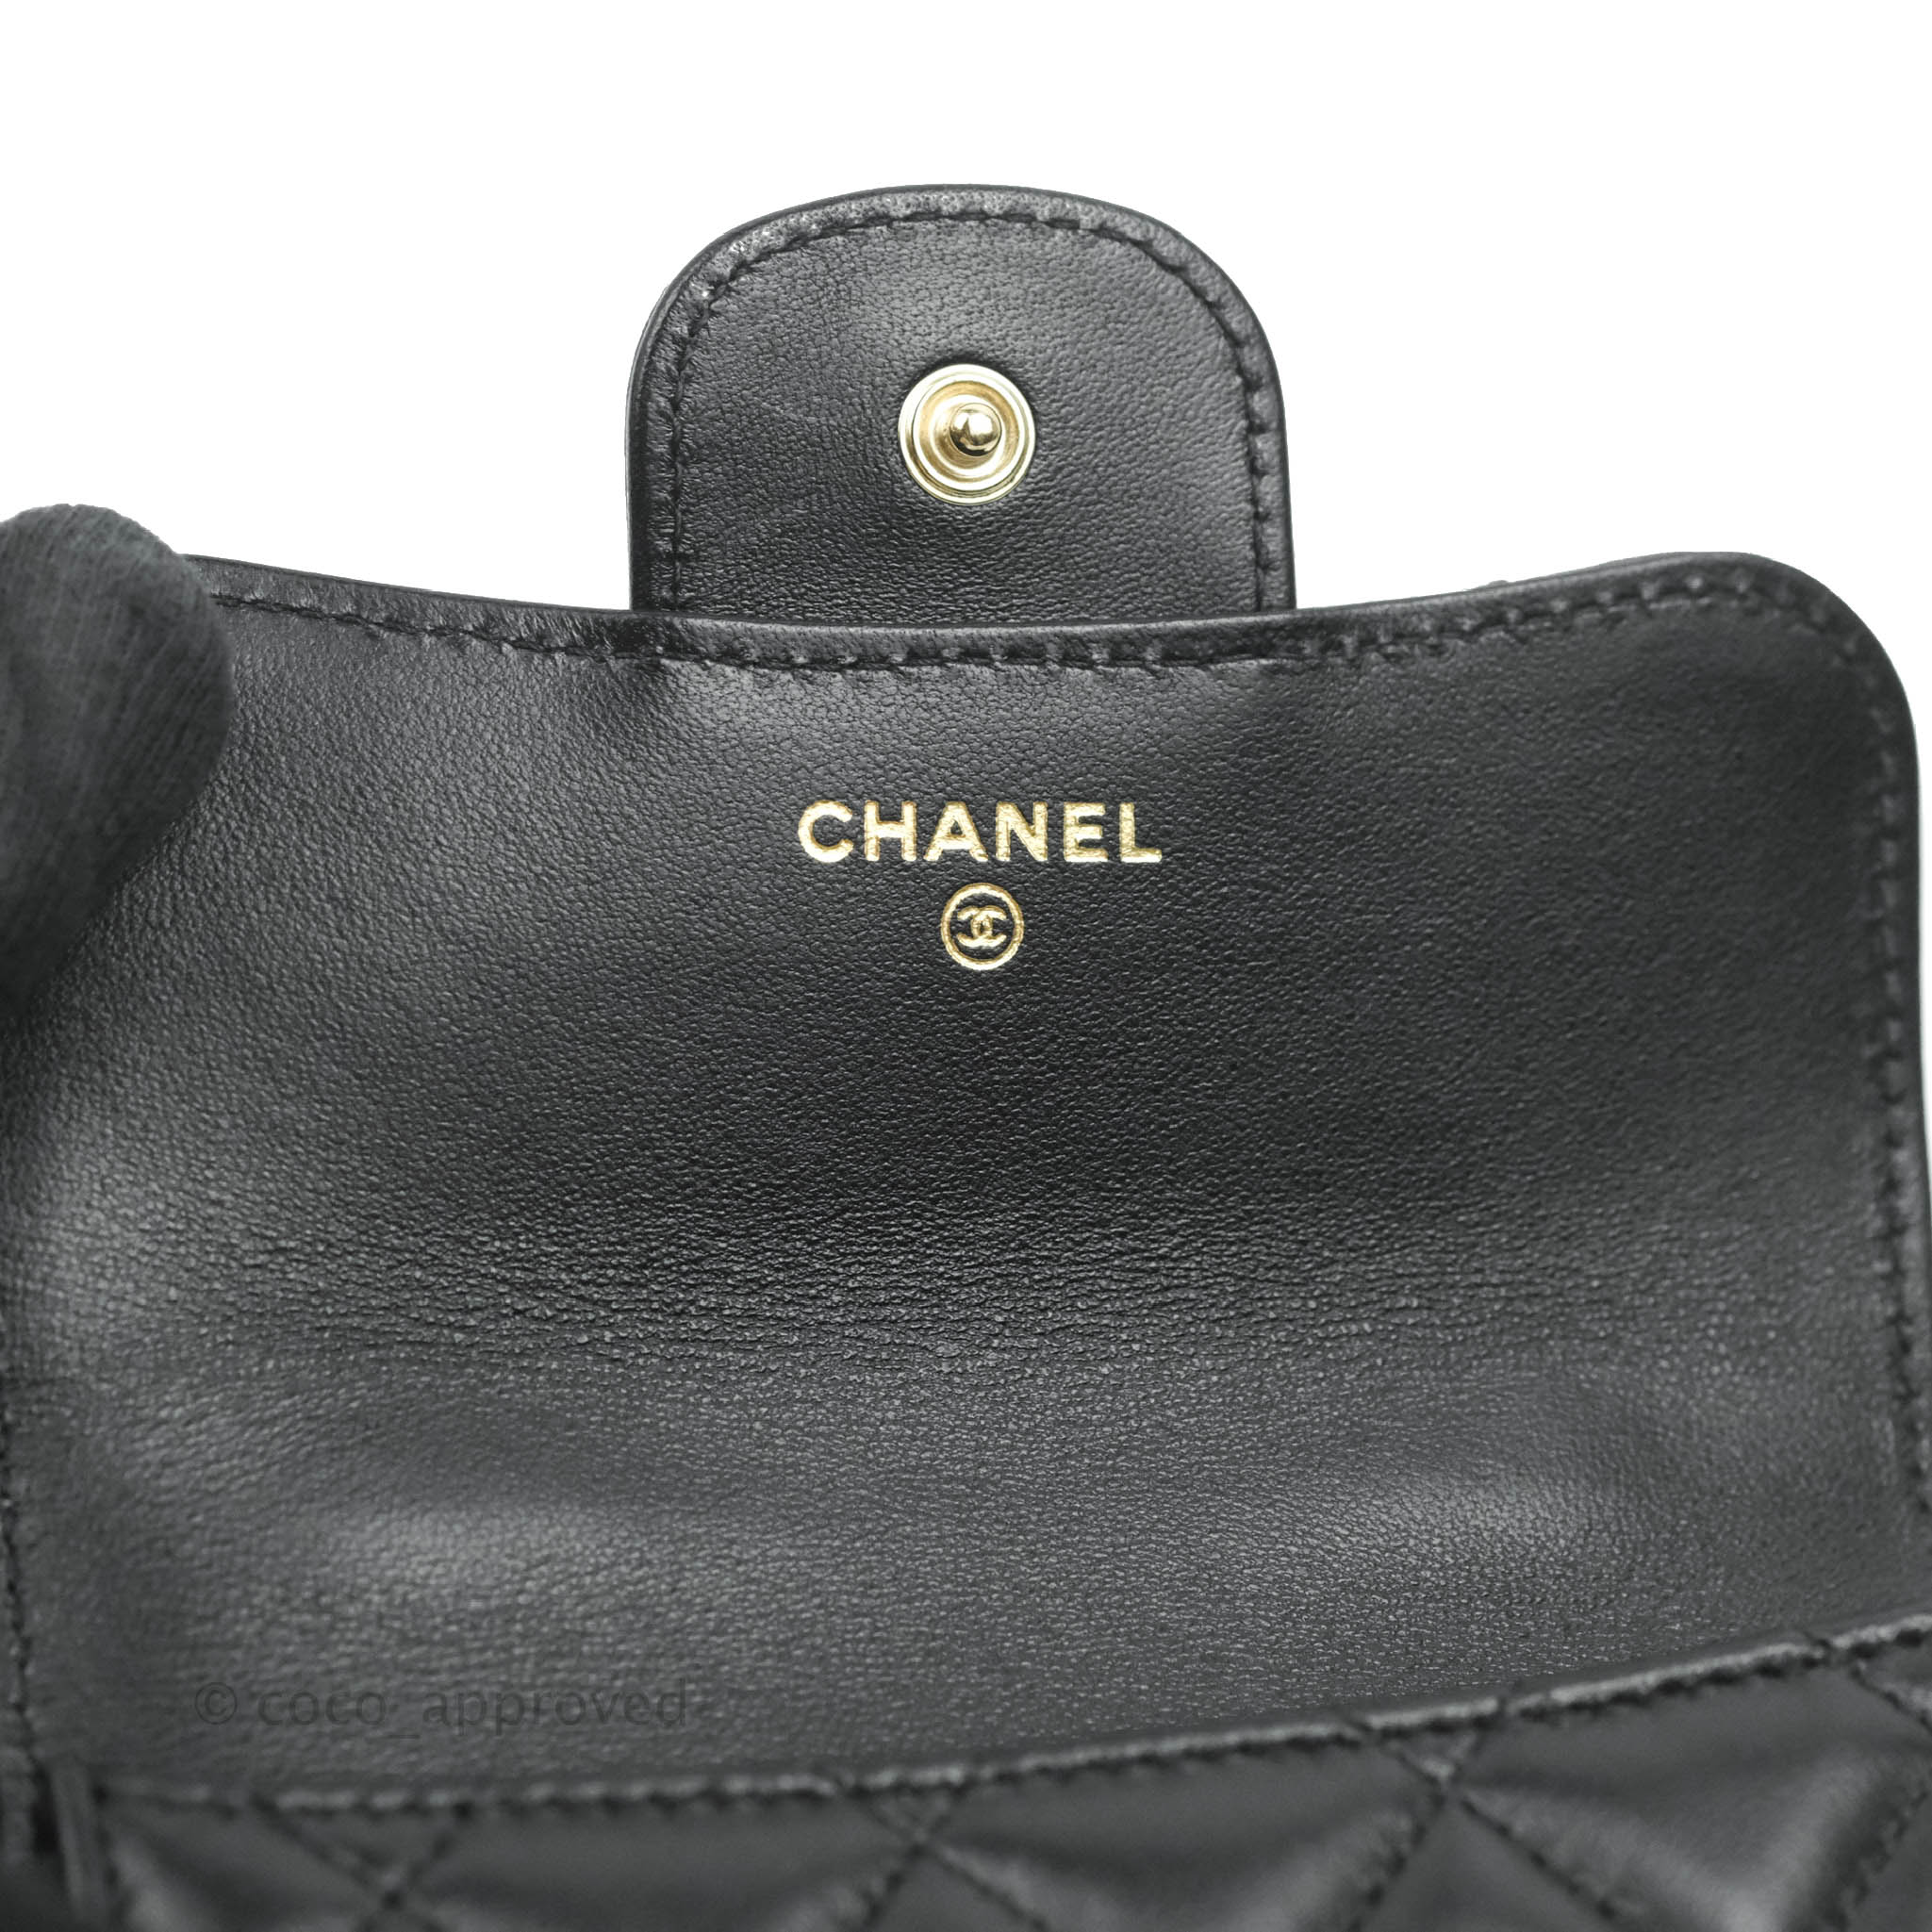 Chanel 19 Caramel Zipped Coin Purse Lambskin Gold Hardware – Coco Approved  Studio